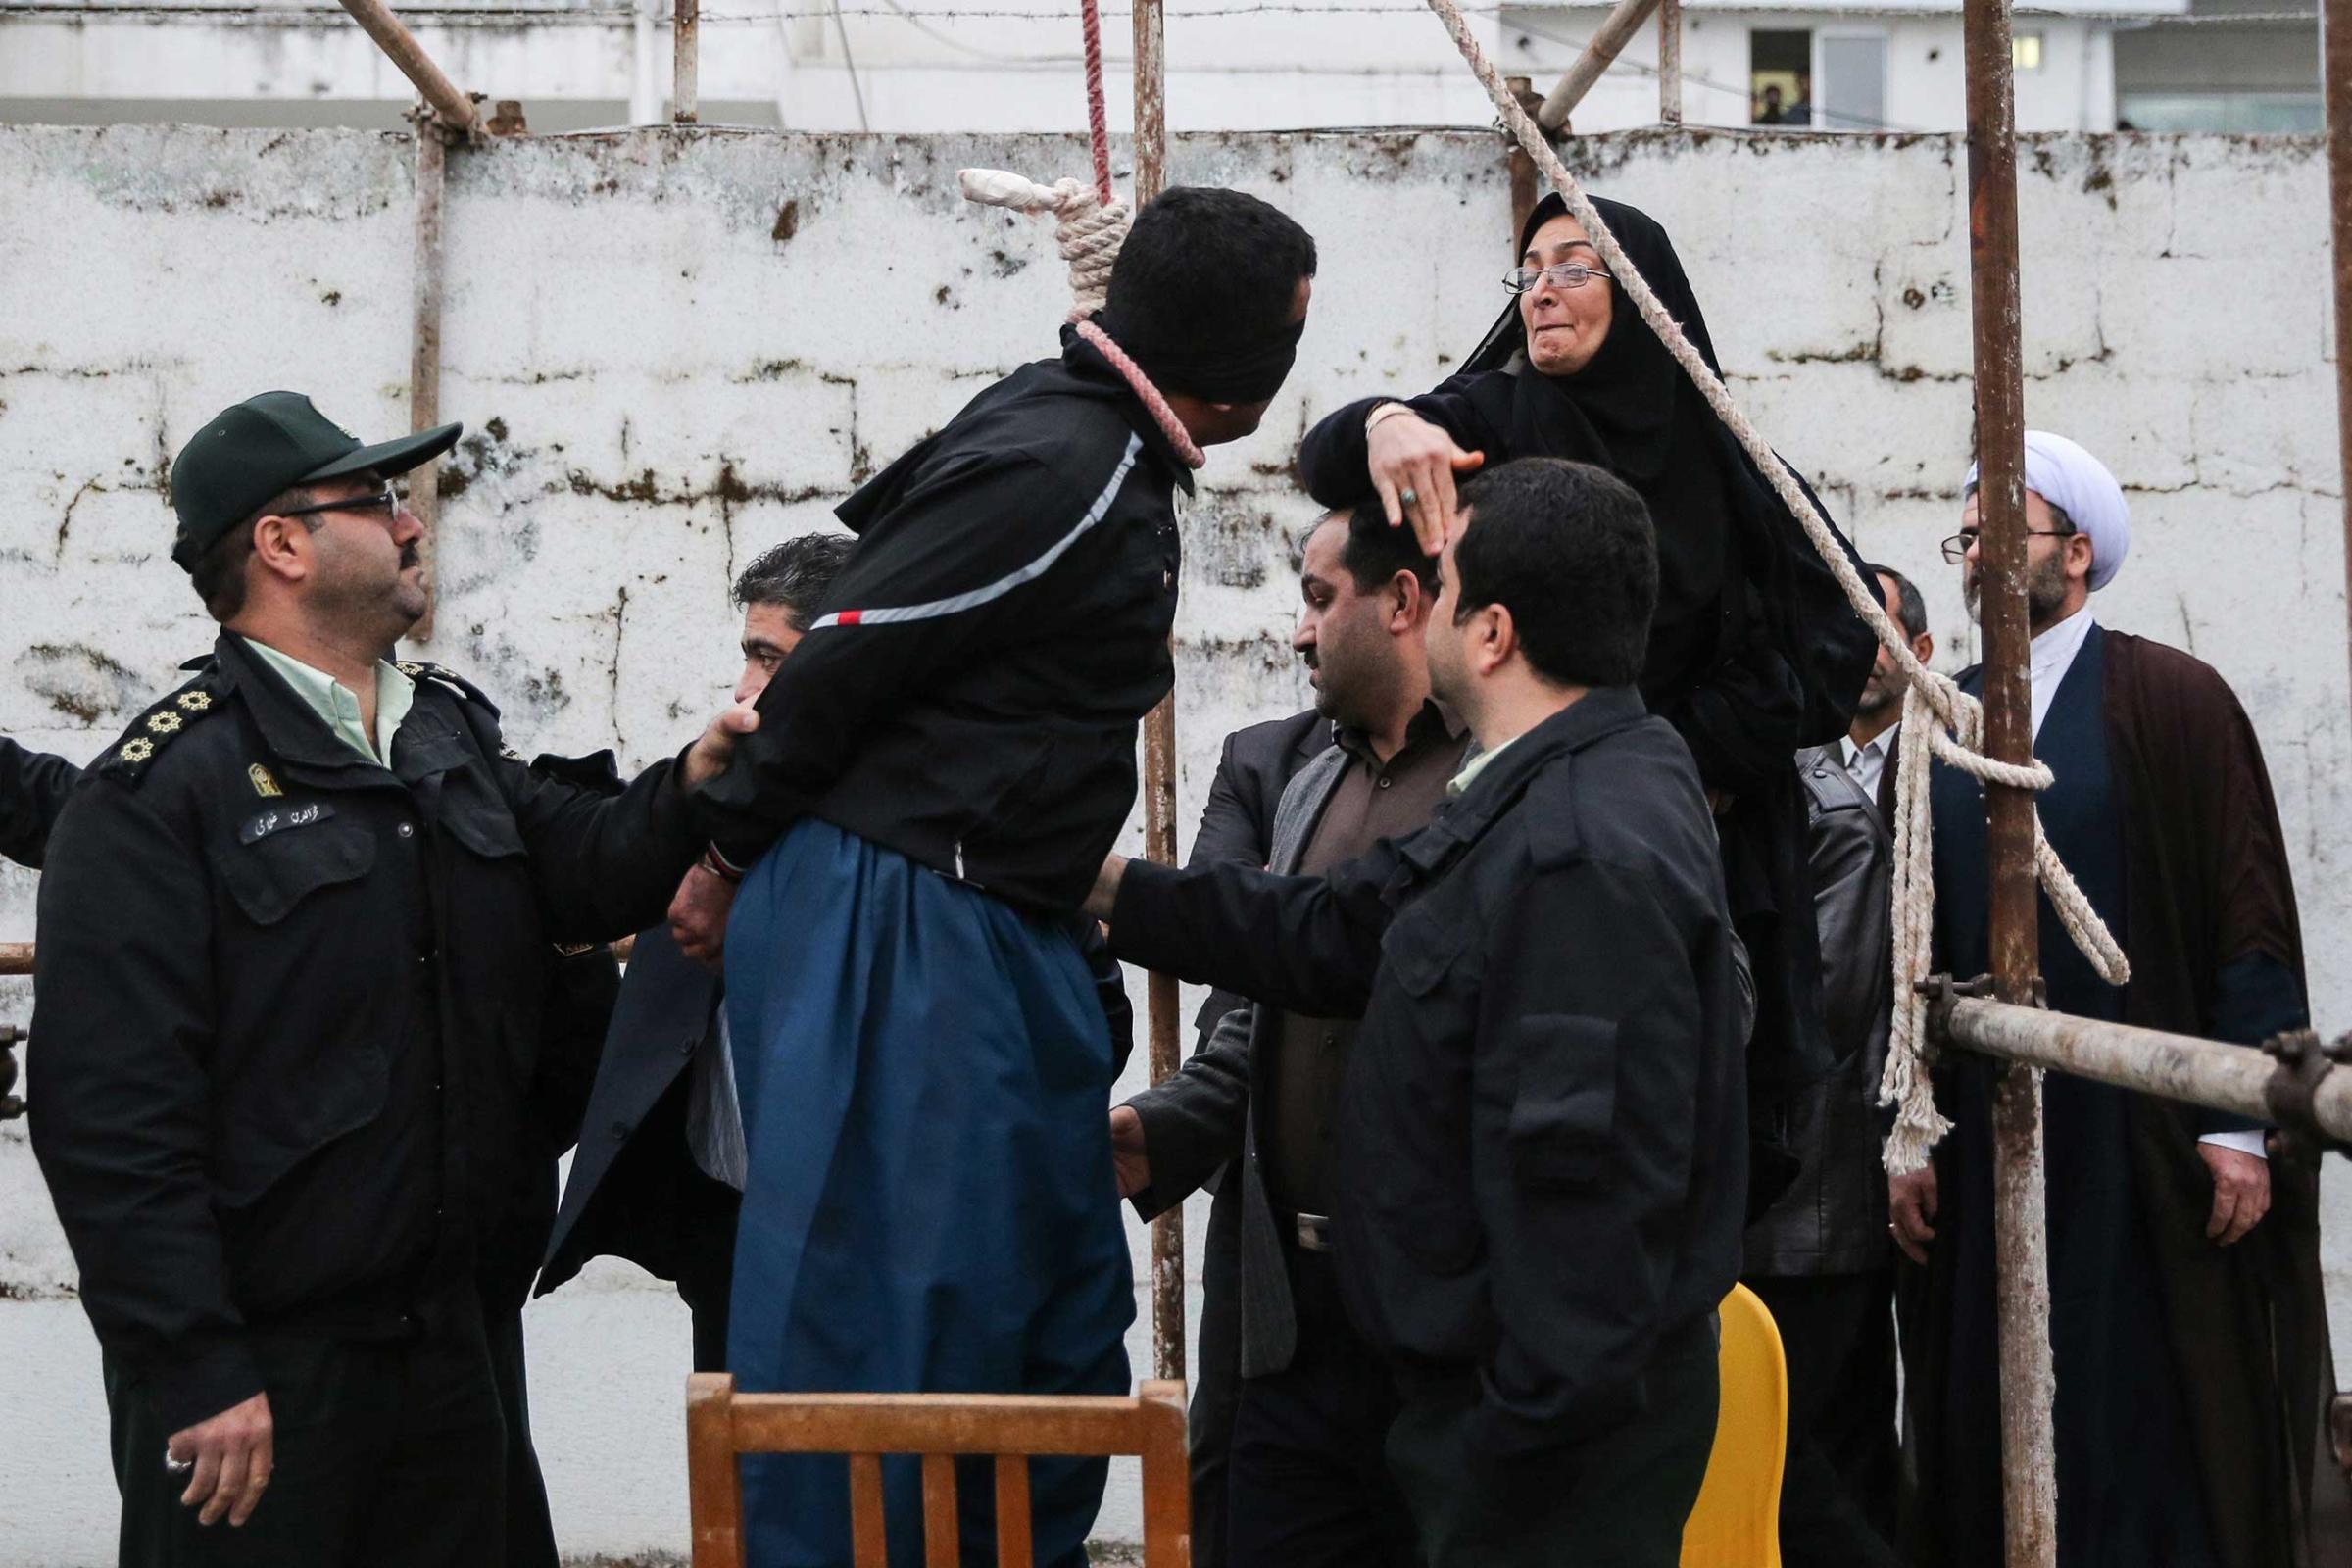 The mother of Abdolah Hosseinzadeh, who was murdered in 2007, slaps the man who killed her son during his execution ceremony just before she removed the noose around his neck with the help of her husband, sparing the life of her son's convicted murderer, Nowshahr, Iran, April 15, 2014.